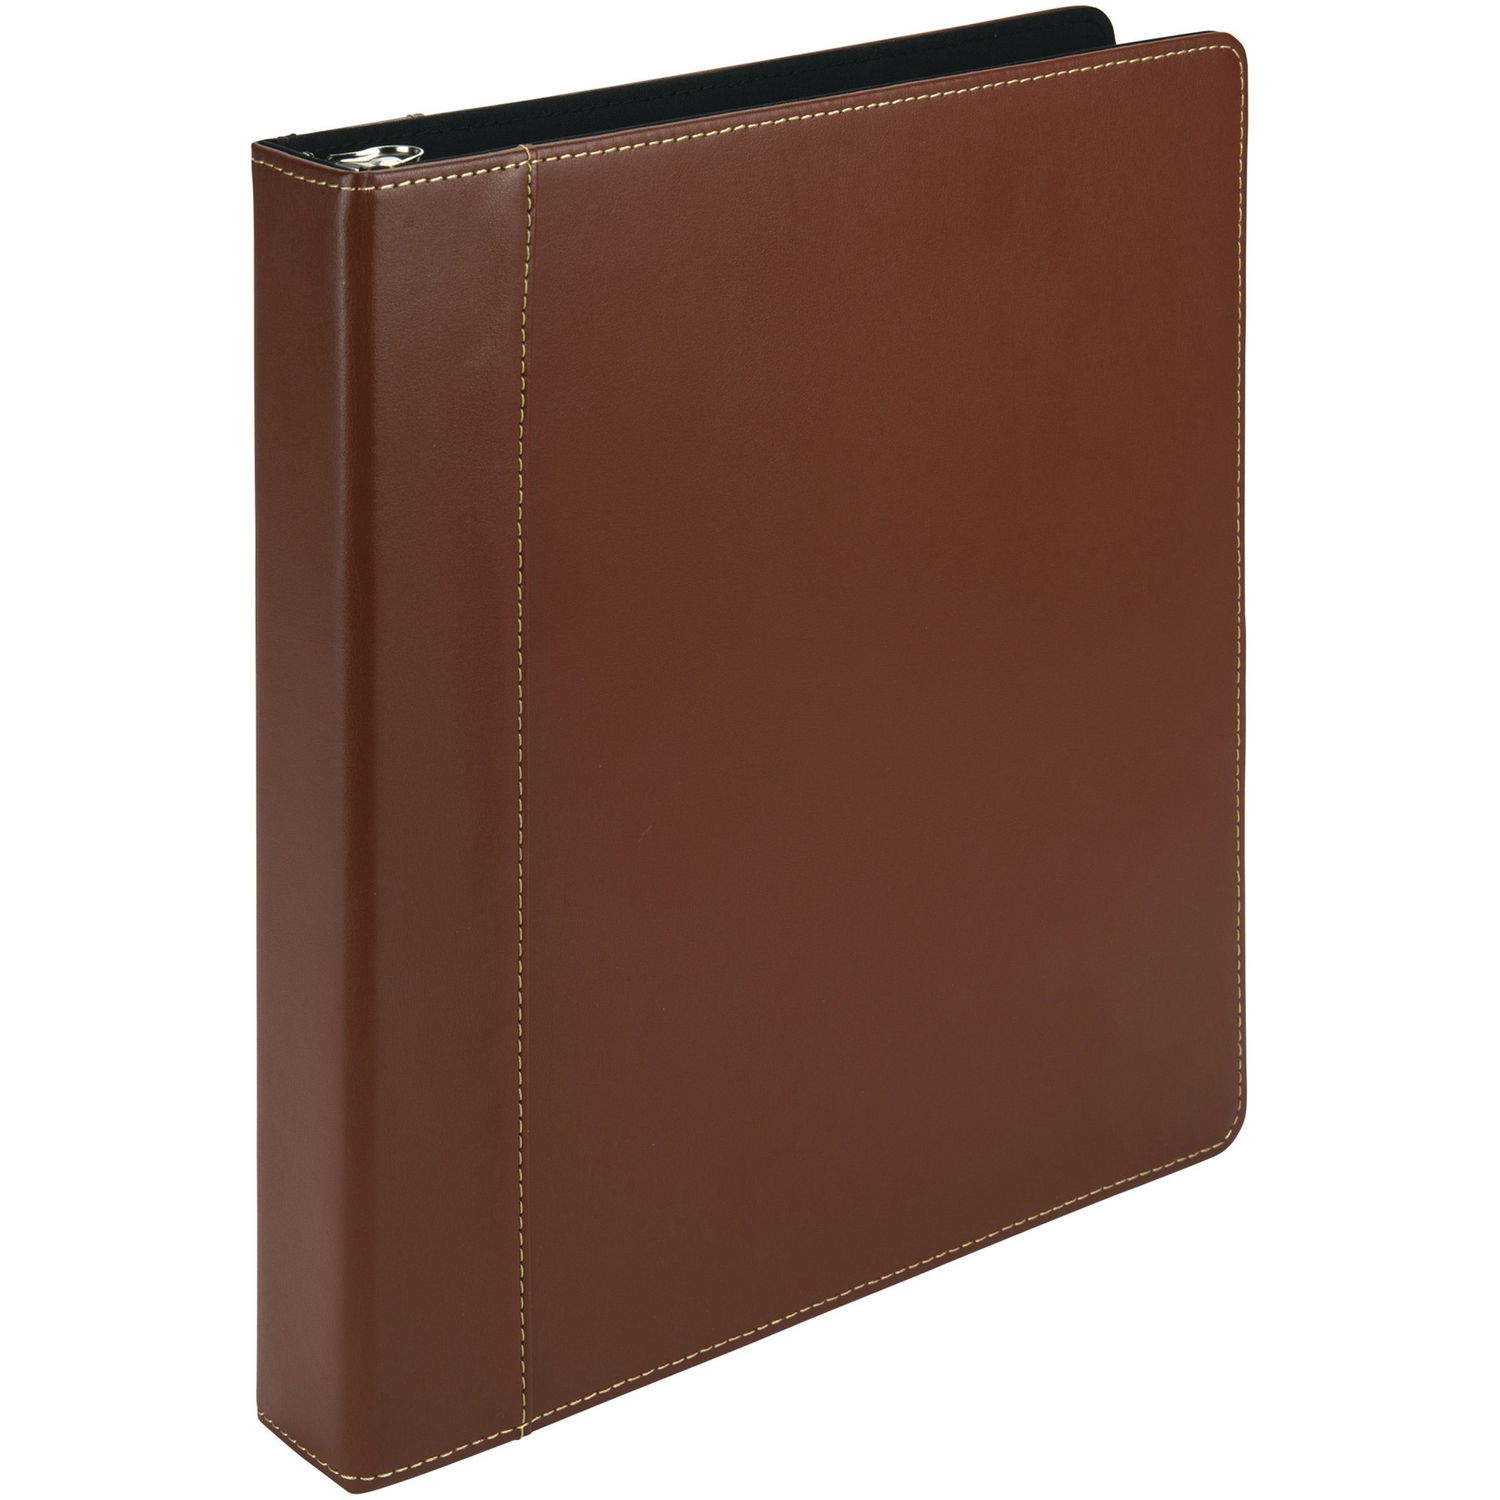 Contrast Stitch Leather Ring Binder 1" Binder Capacity, Letter, 8 1/2" x 11" Sheet Size, 200 Sheet Capacity, Round Ring Fastener(s), 2 Internal Pocket(s), Bonded Leather, LeatherGrain, Tan